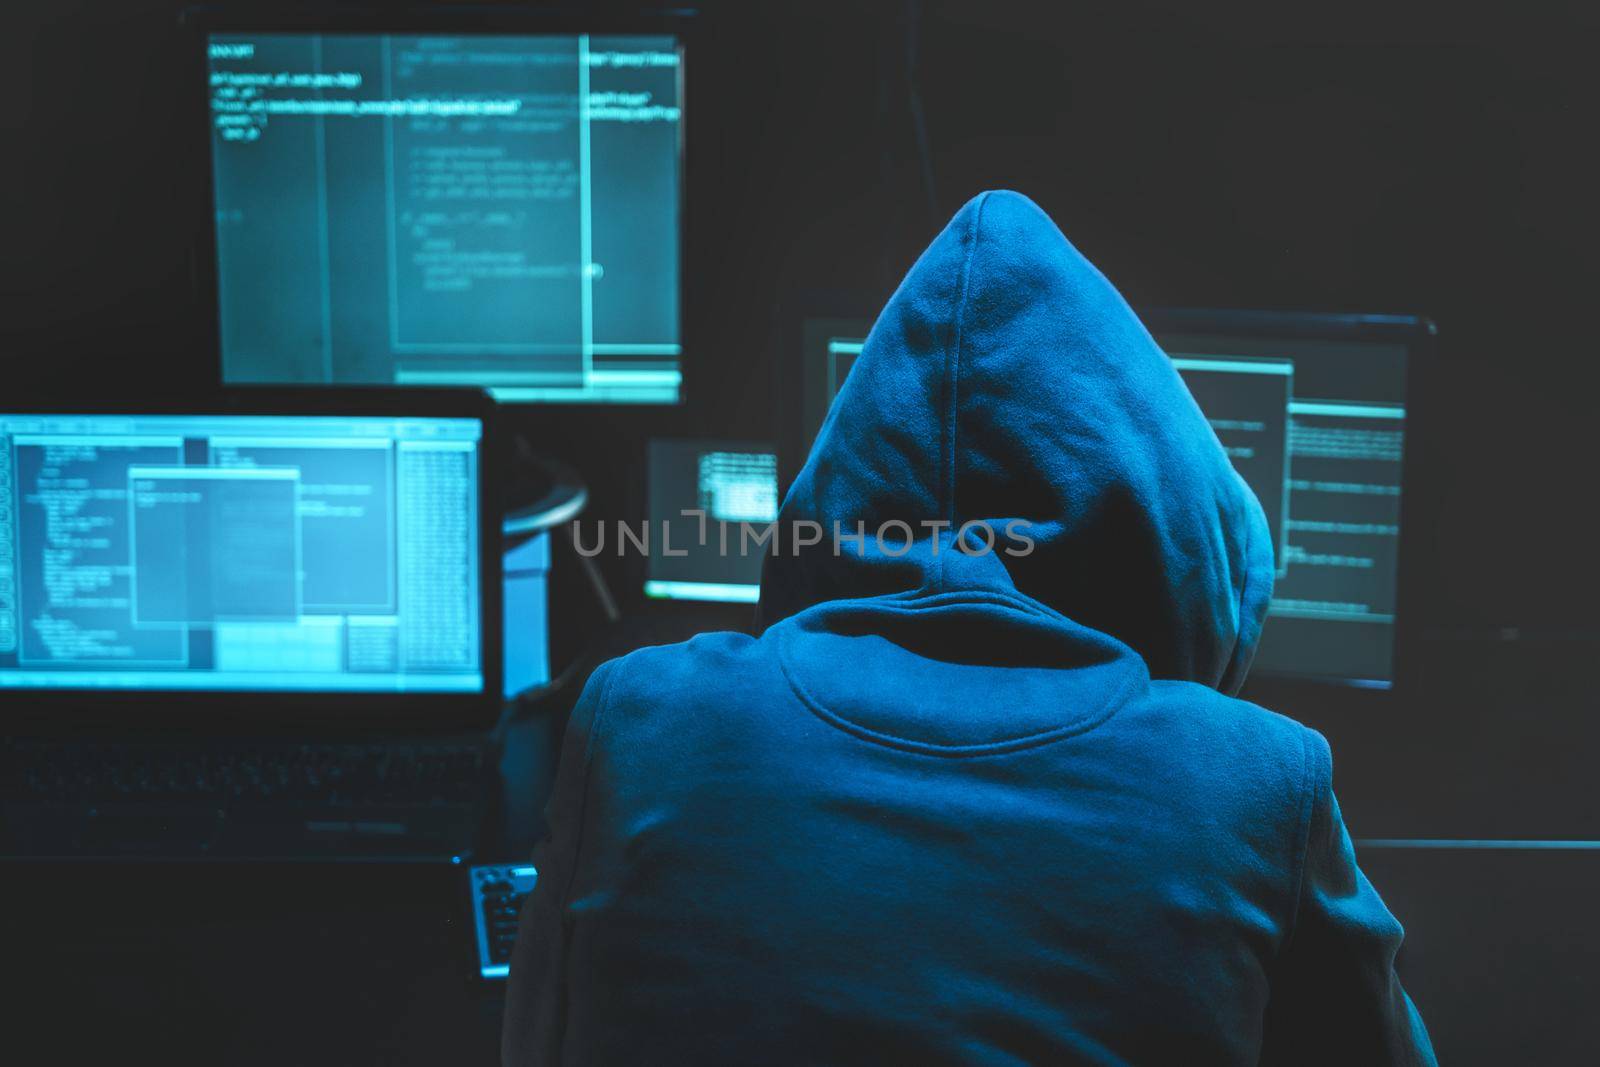 Hacker using computer for organizing massive data breach attack on goverment servers. Hacker in dark room surrounded computers. Download photo